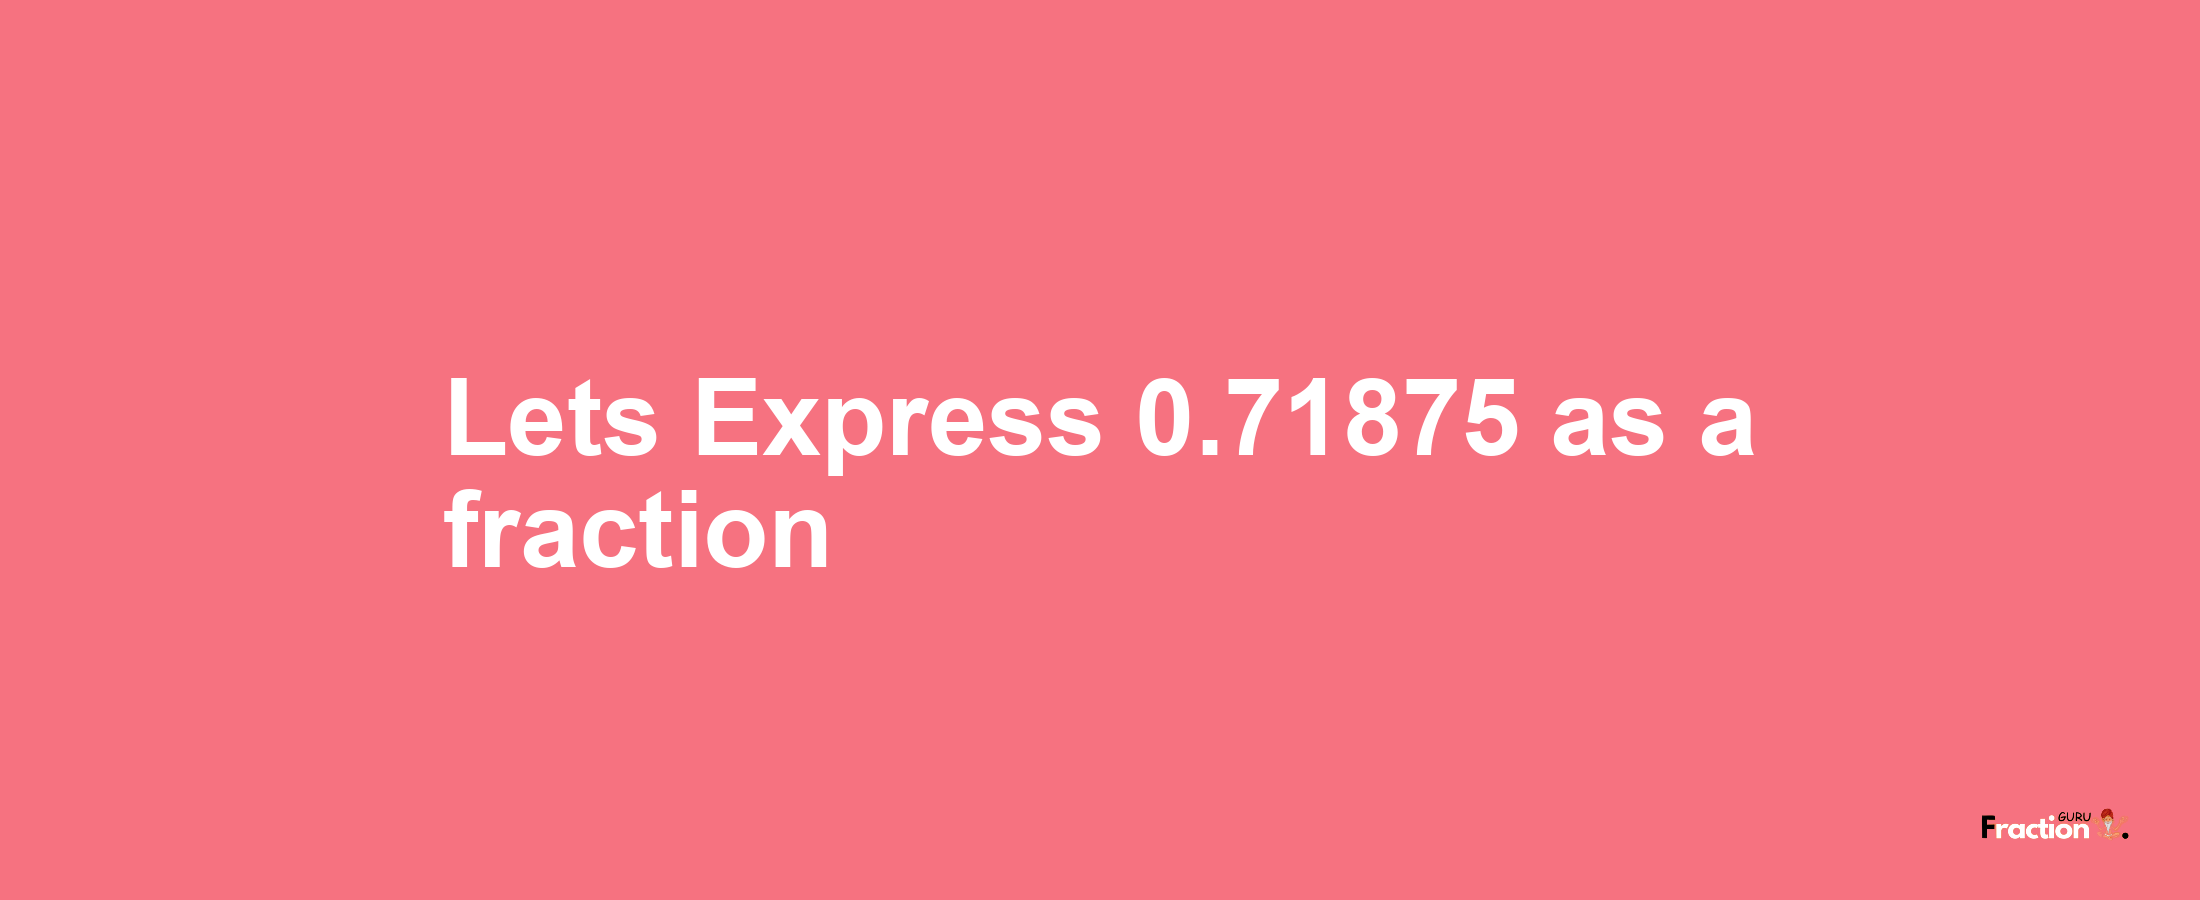 Lets Express 0.71875 as afraction